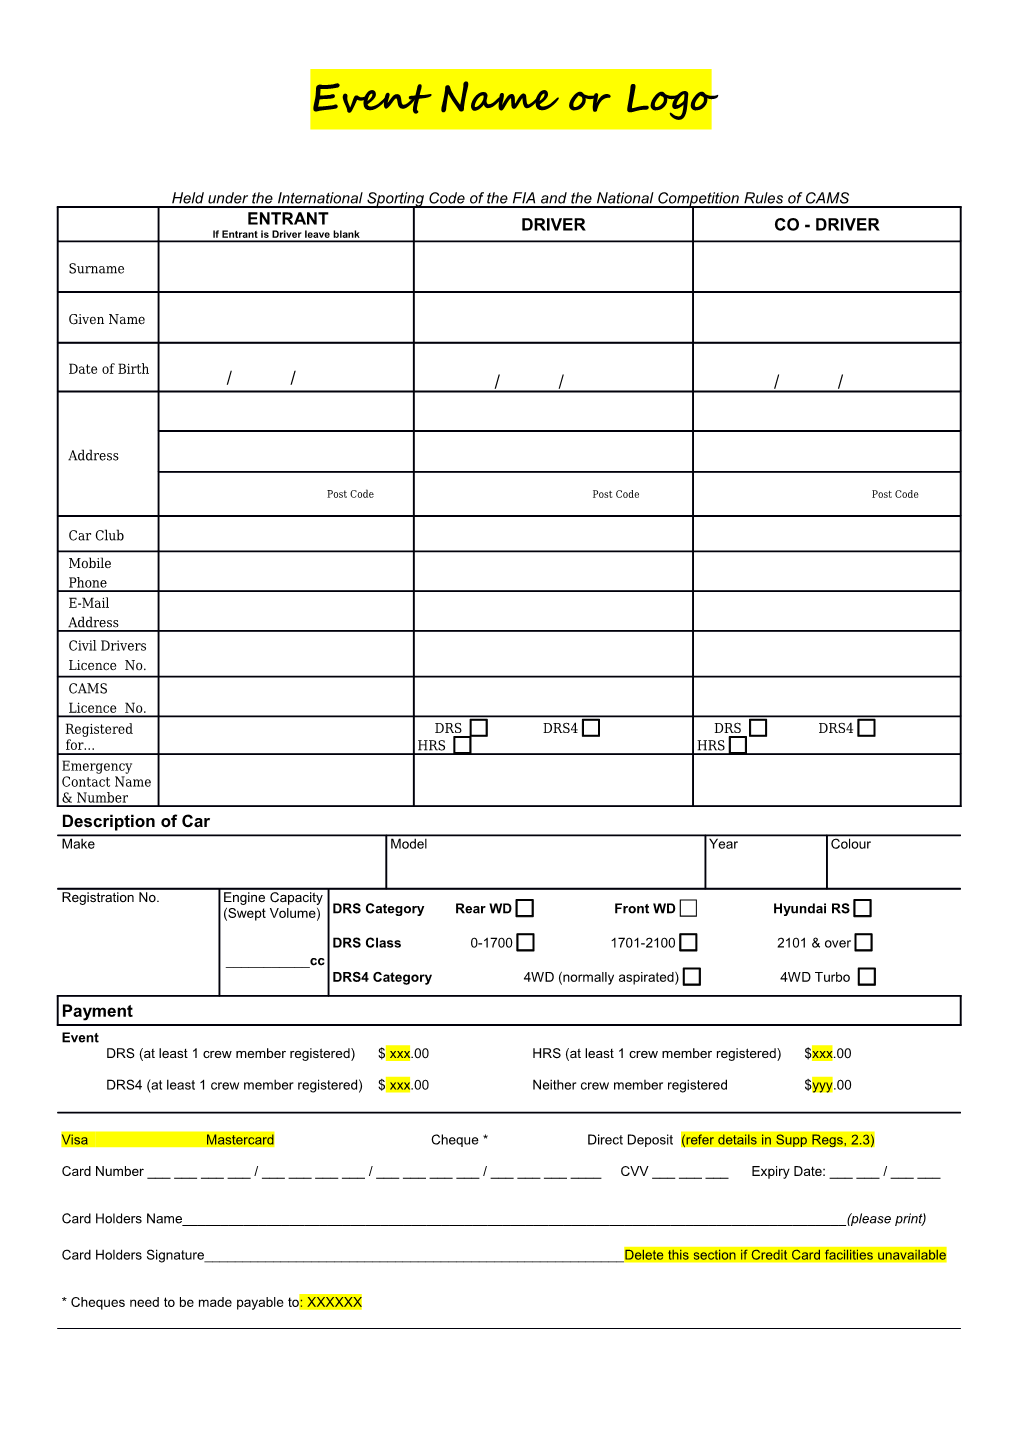 Caltex Airport Starmart Rally - Entry Form s1